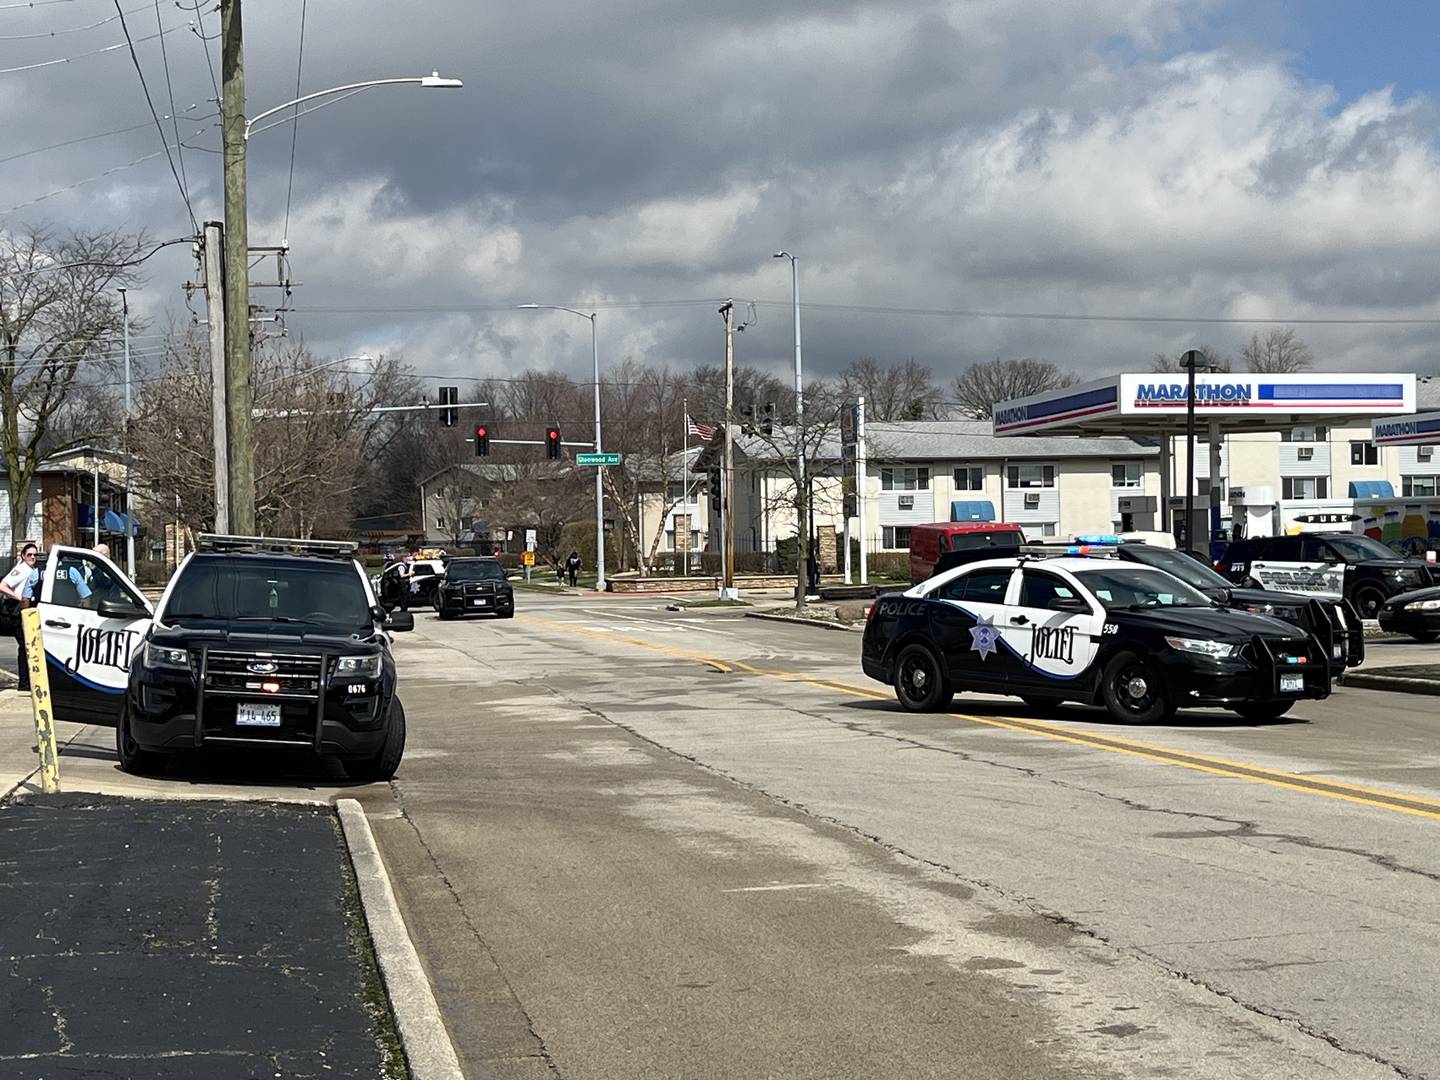 Joliet police officers at the scene of a shooting on Thursday, March 14 on Republic Avenue in Joliet.